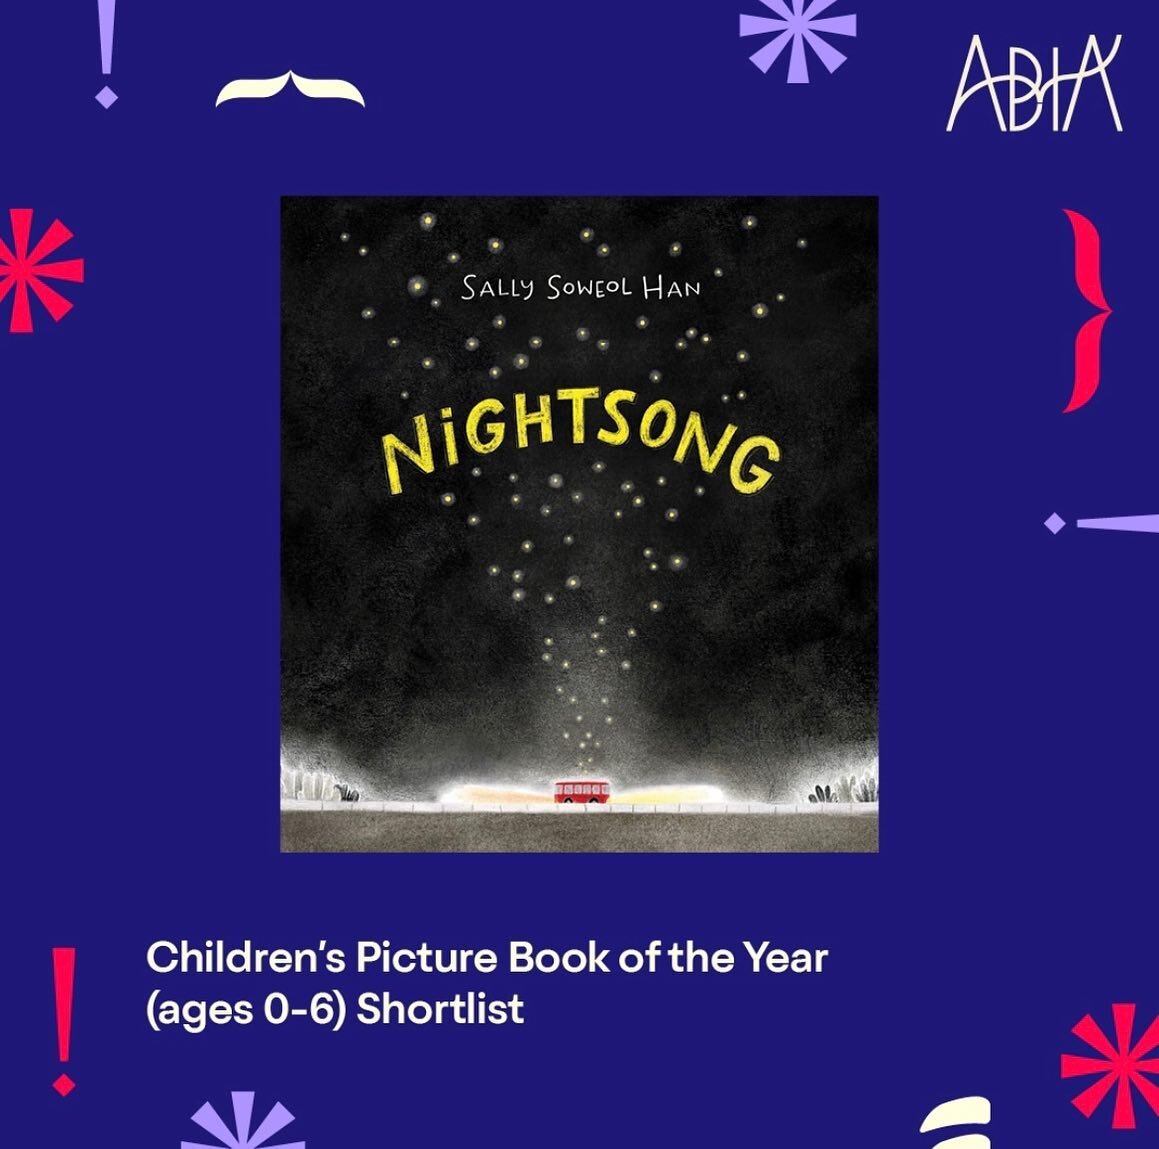 What a surprise! So pleased to know that NIGHTSONG made into the shortlist #ABIA2024 with incredible company! Thank you🥳💛

@abia_awards #australianbookindustryawards
@uqpbooks
@clair_hume 
@annabelbarkeragency 

#nightsong #picturebook #abia2024 #s